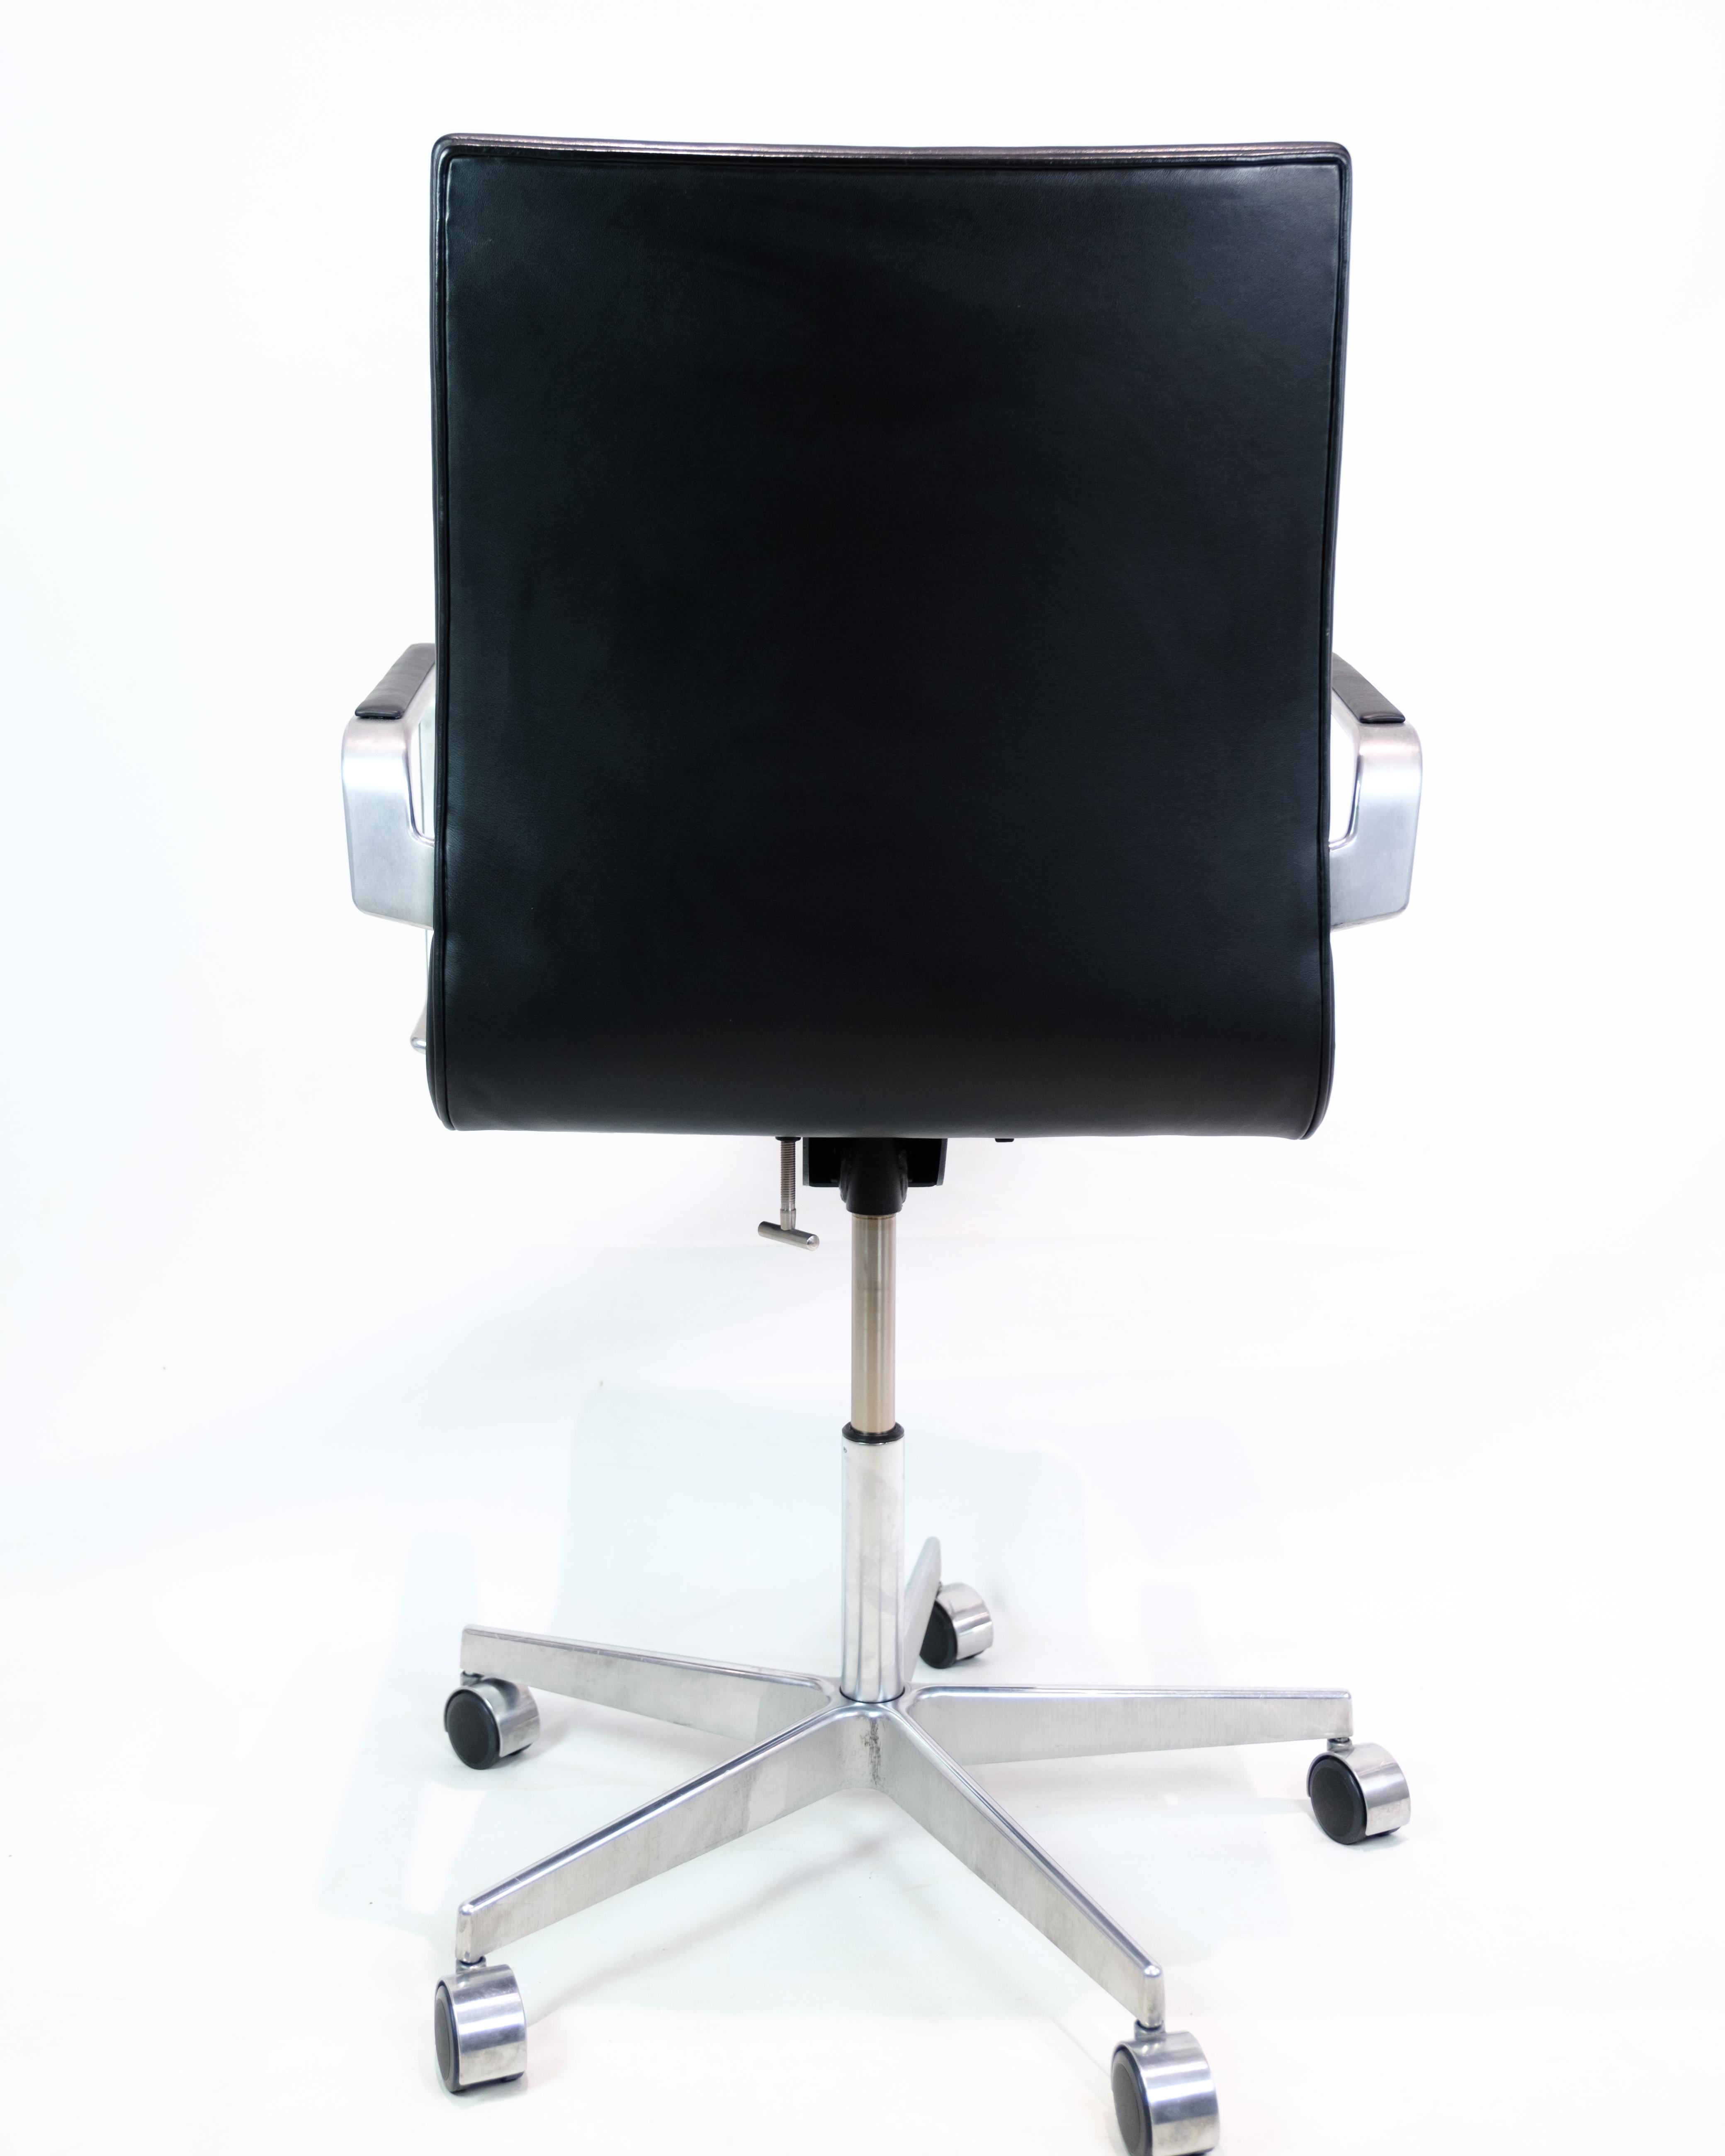 Late 20th Century Desk chair, Model 3271W Oxford in Black Leather by Arne Jacobsen from 1980 For Sale